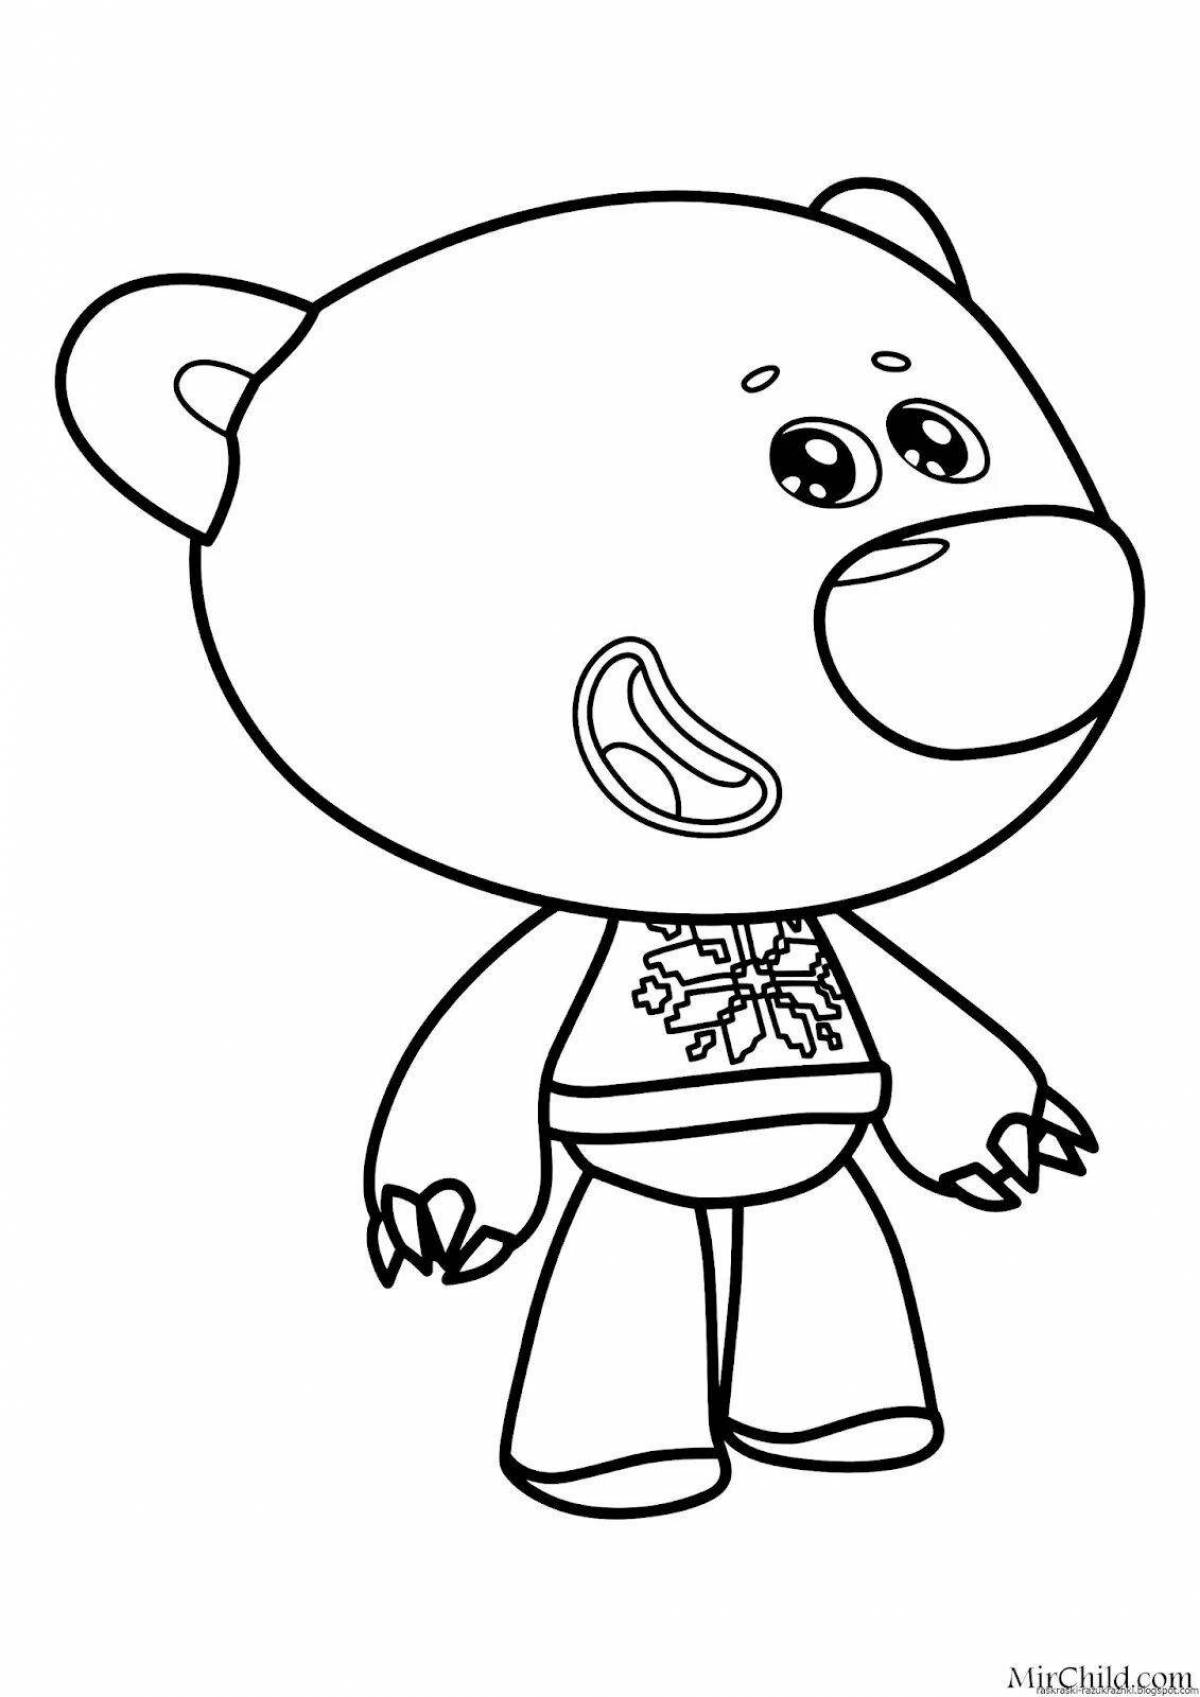 Adorable little bears coloring pages for kids